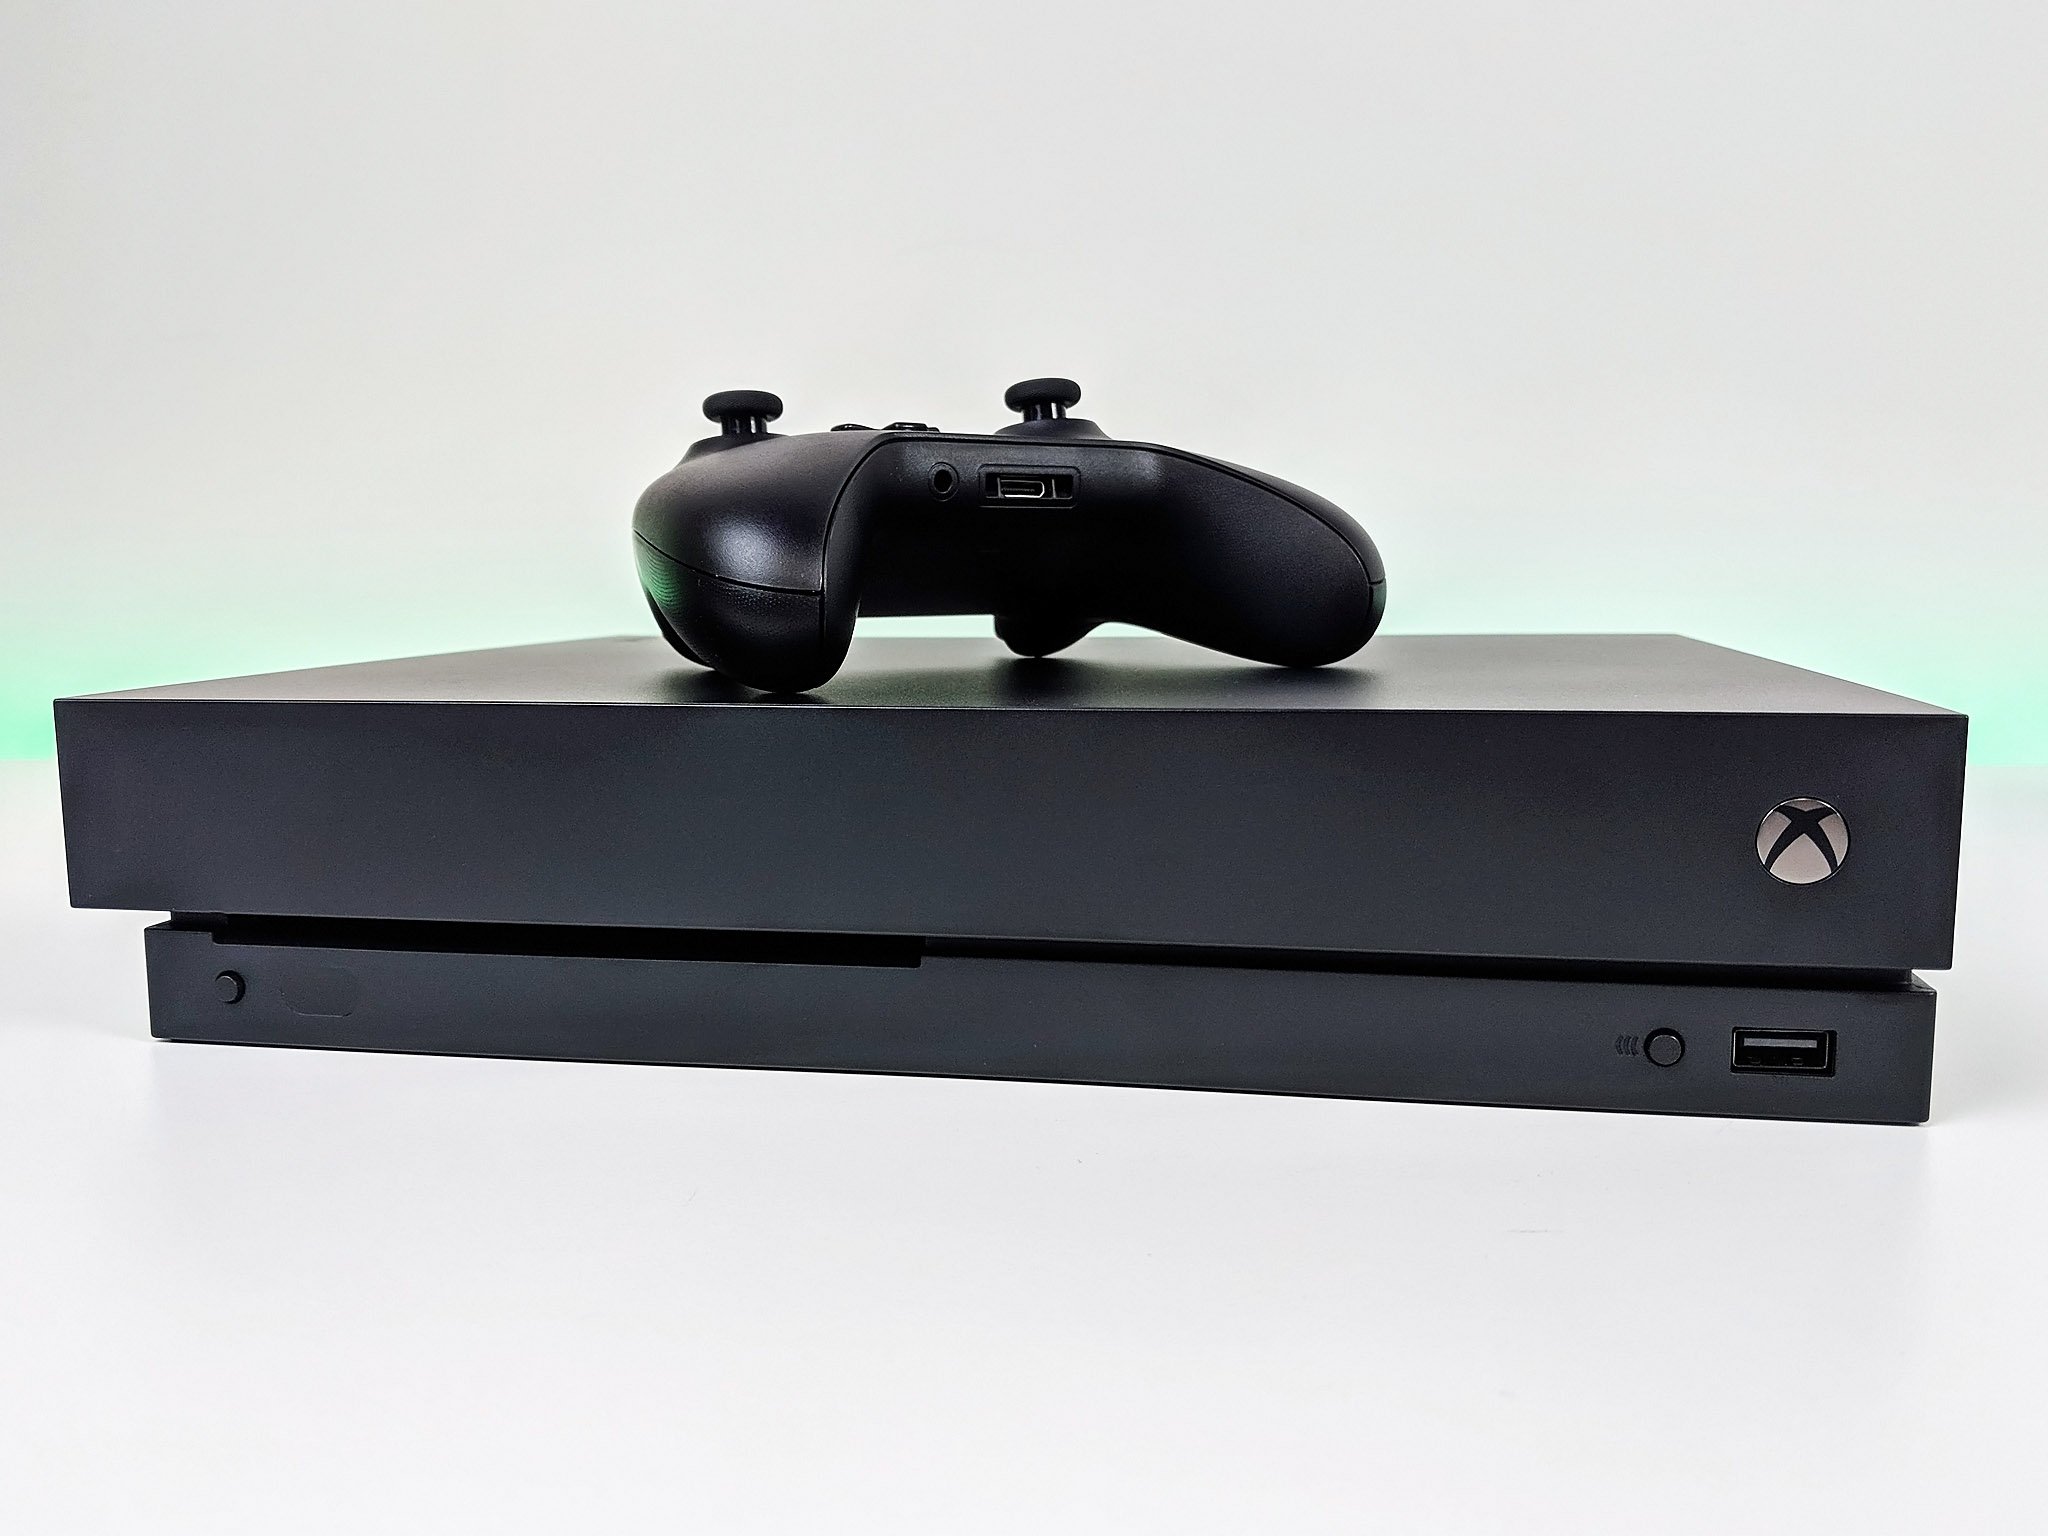 Latest Xbox One system update arrives with Cortana Skills, new setup options, and more